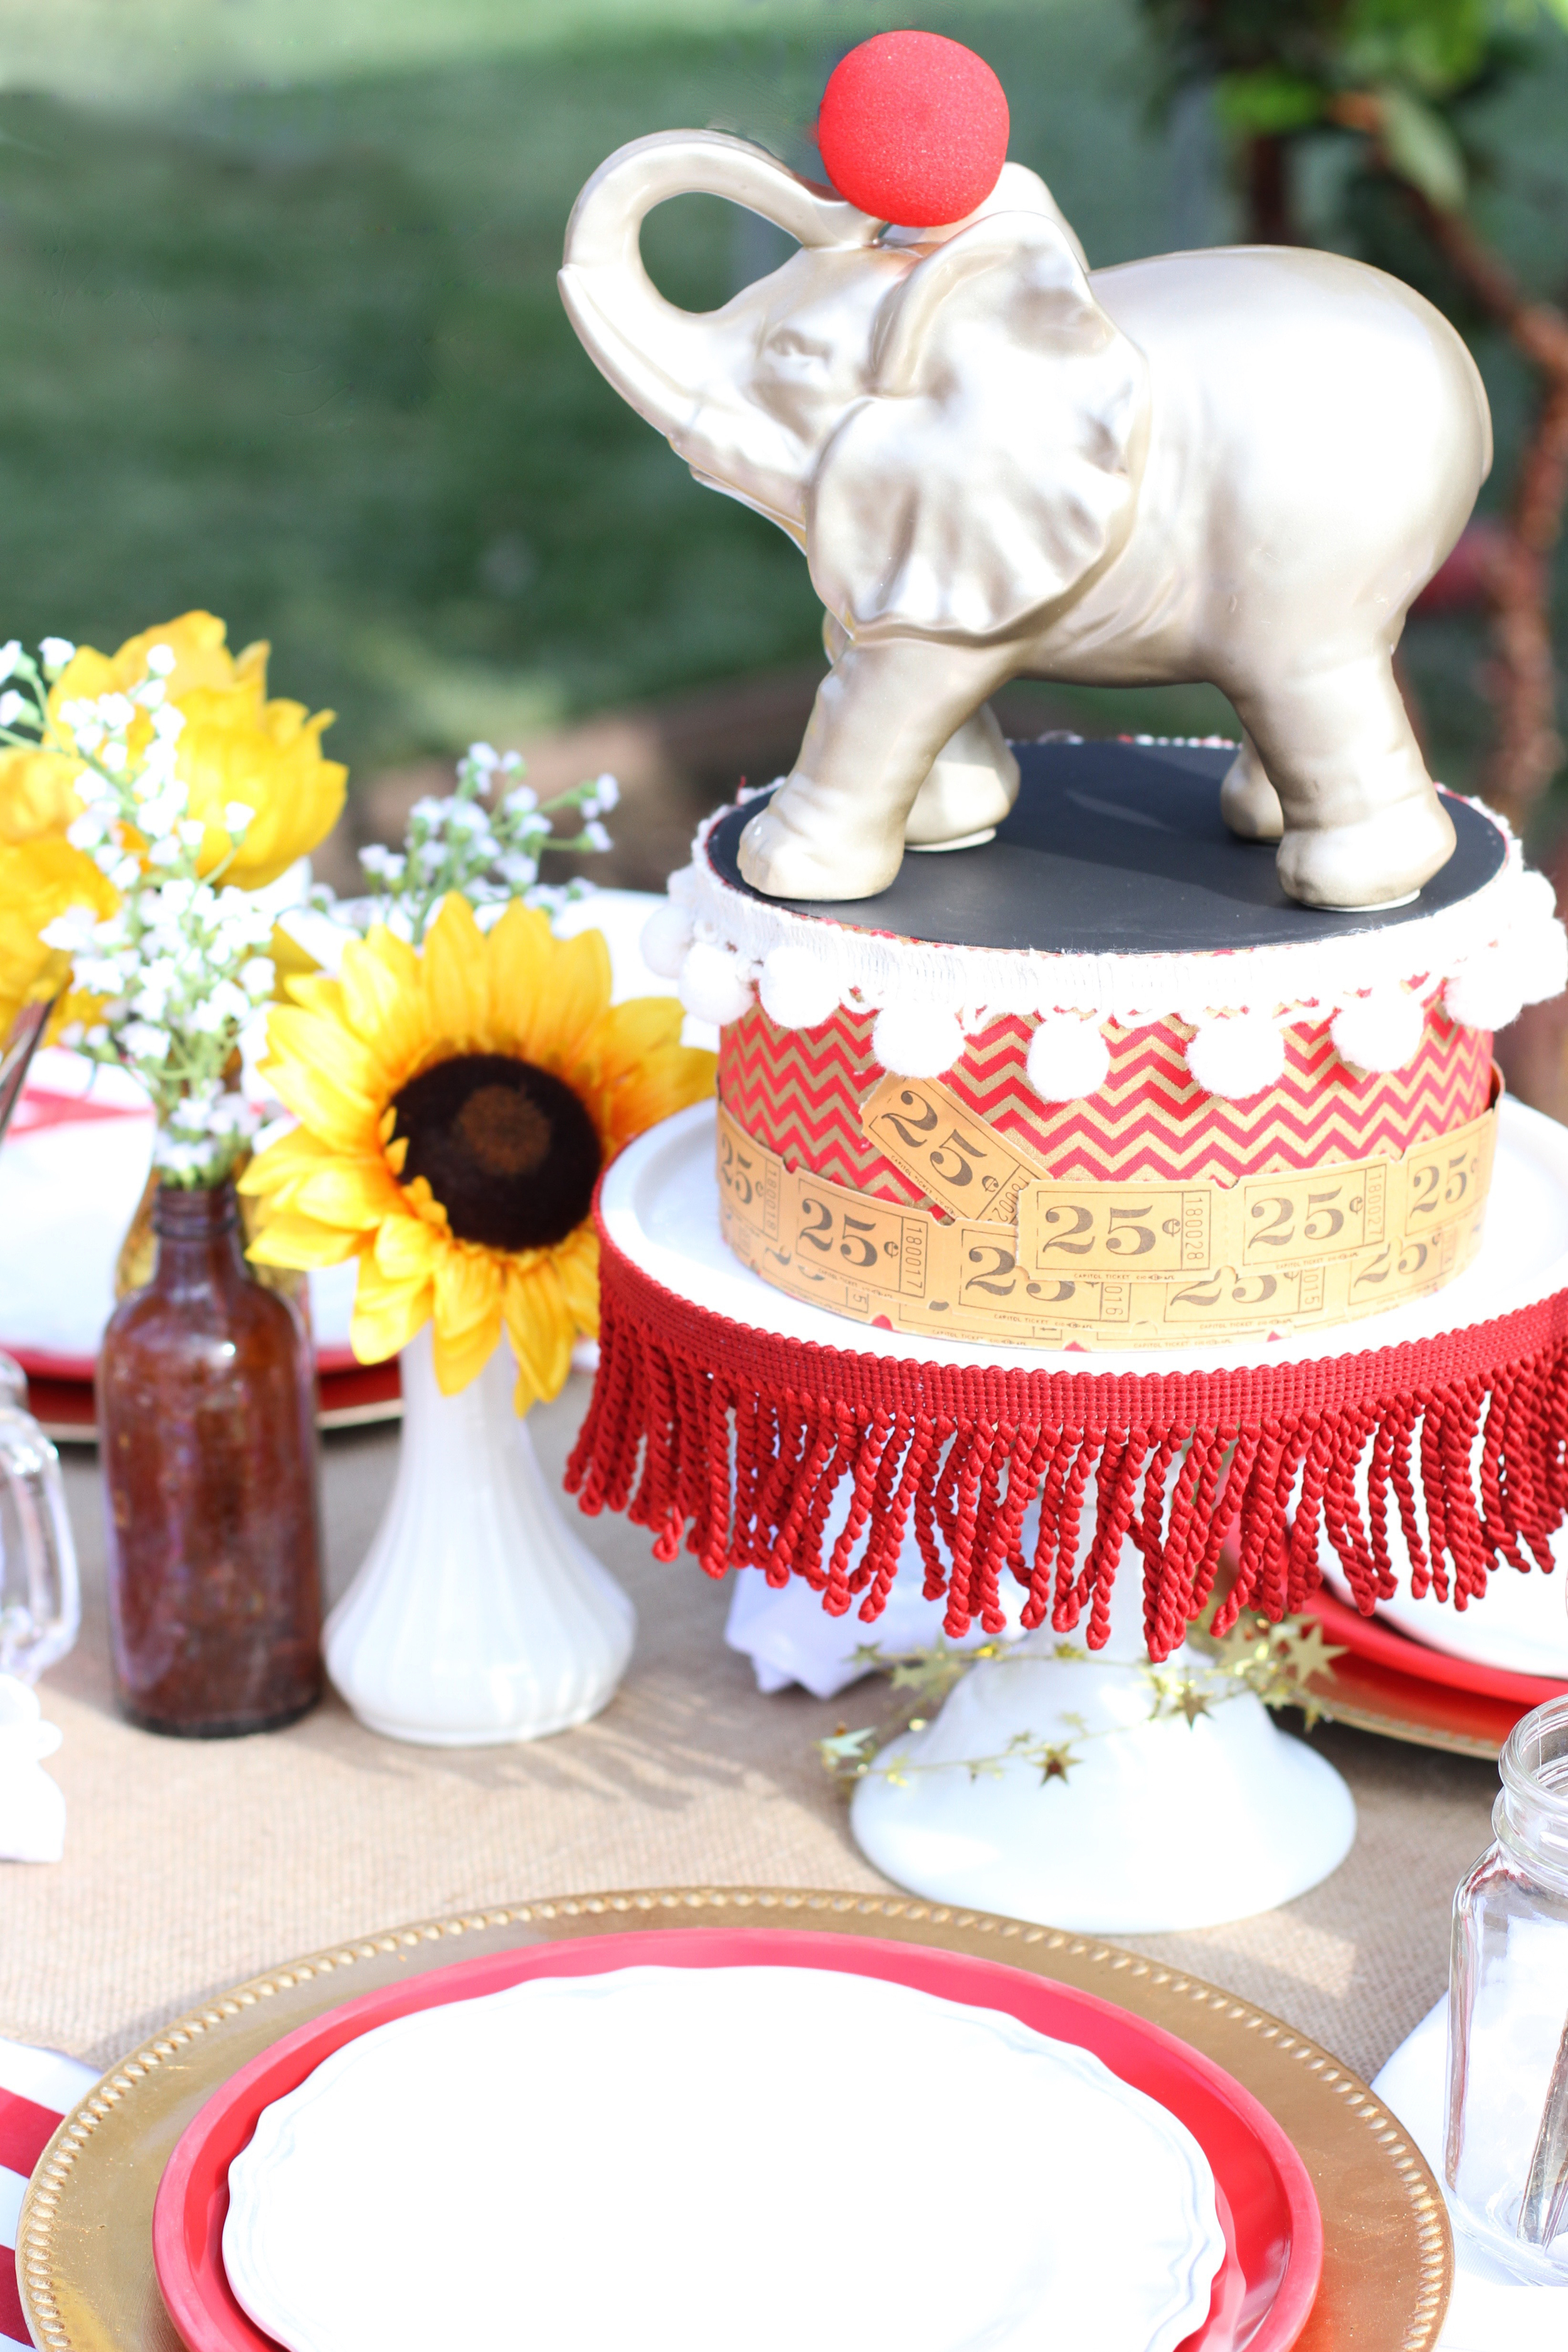 Copy of The best party on Earth! A perfectly executed circus themed party - Prepackaged and ready to rent from @inJOYtheParty!